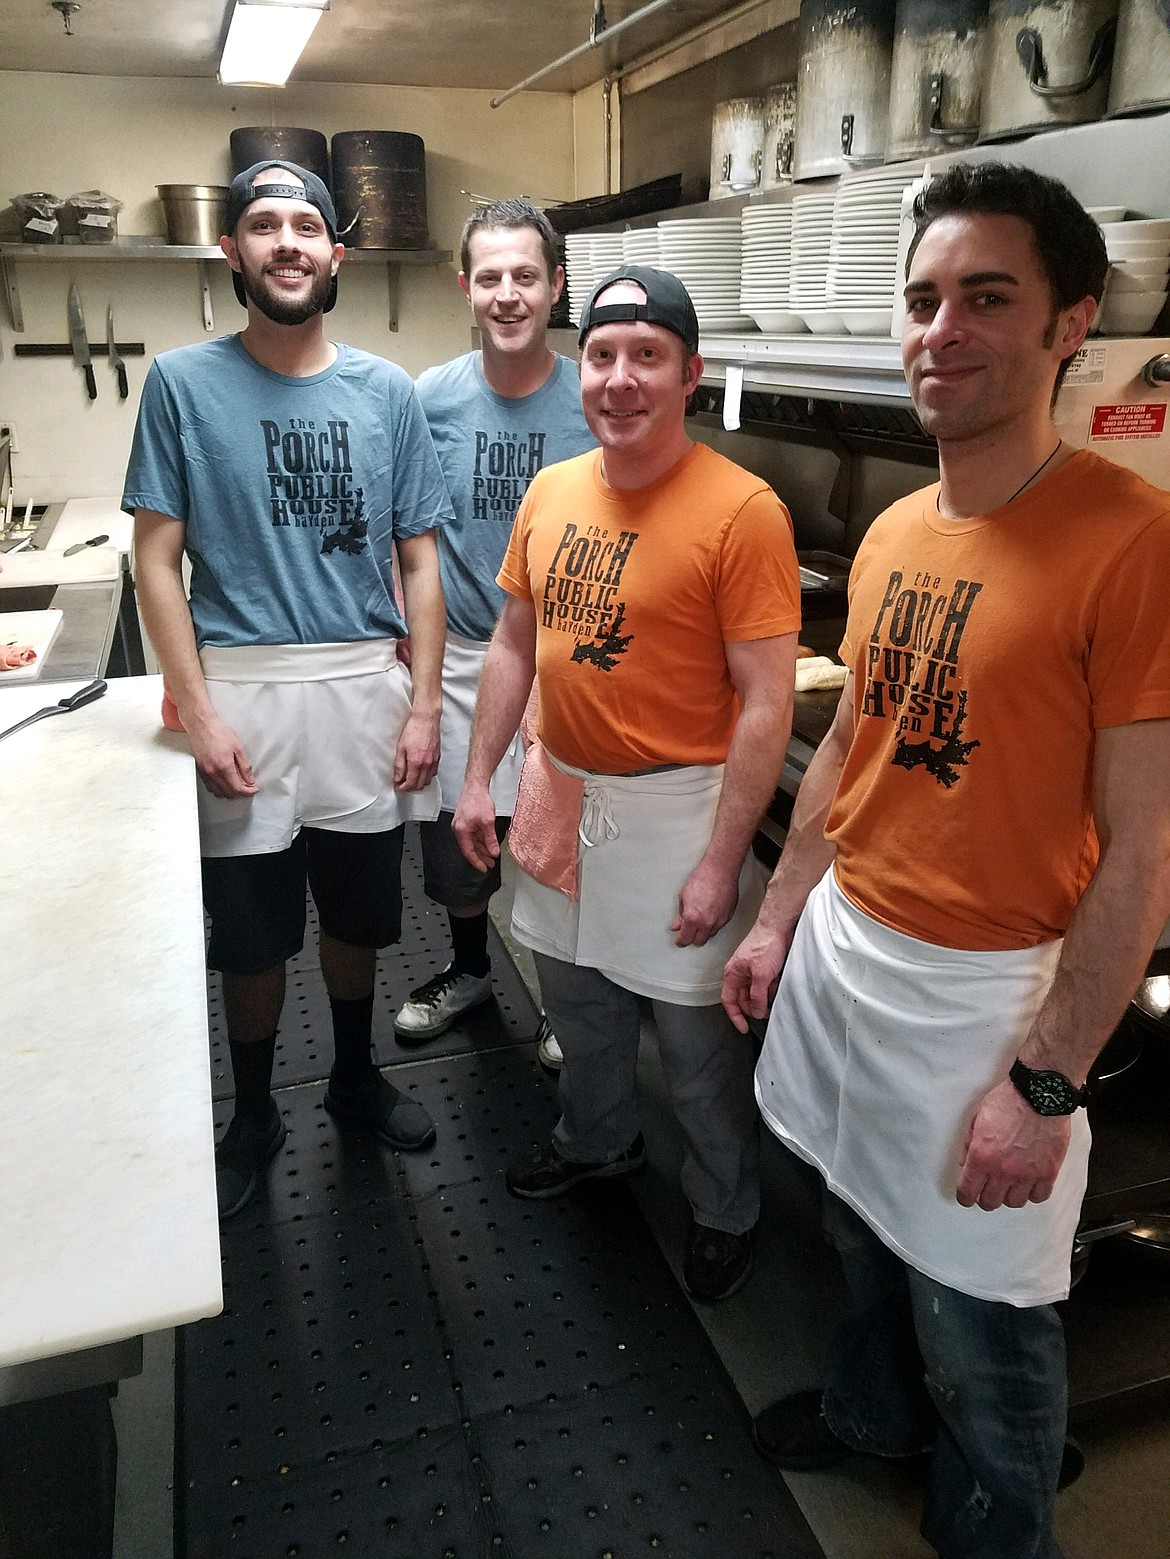 From left, Dylan Higgins, Ricky Laws, Luke Tracey and Jordan Cook smile for the camera before preparing for the dinner rush Friday. Workers like these guys have access to emergency help through CDAIDE, a nonprofit dedicated to helping the service and hospitality community. (Courtesy photo)